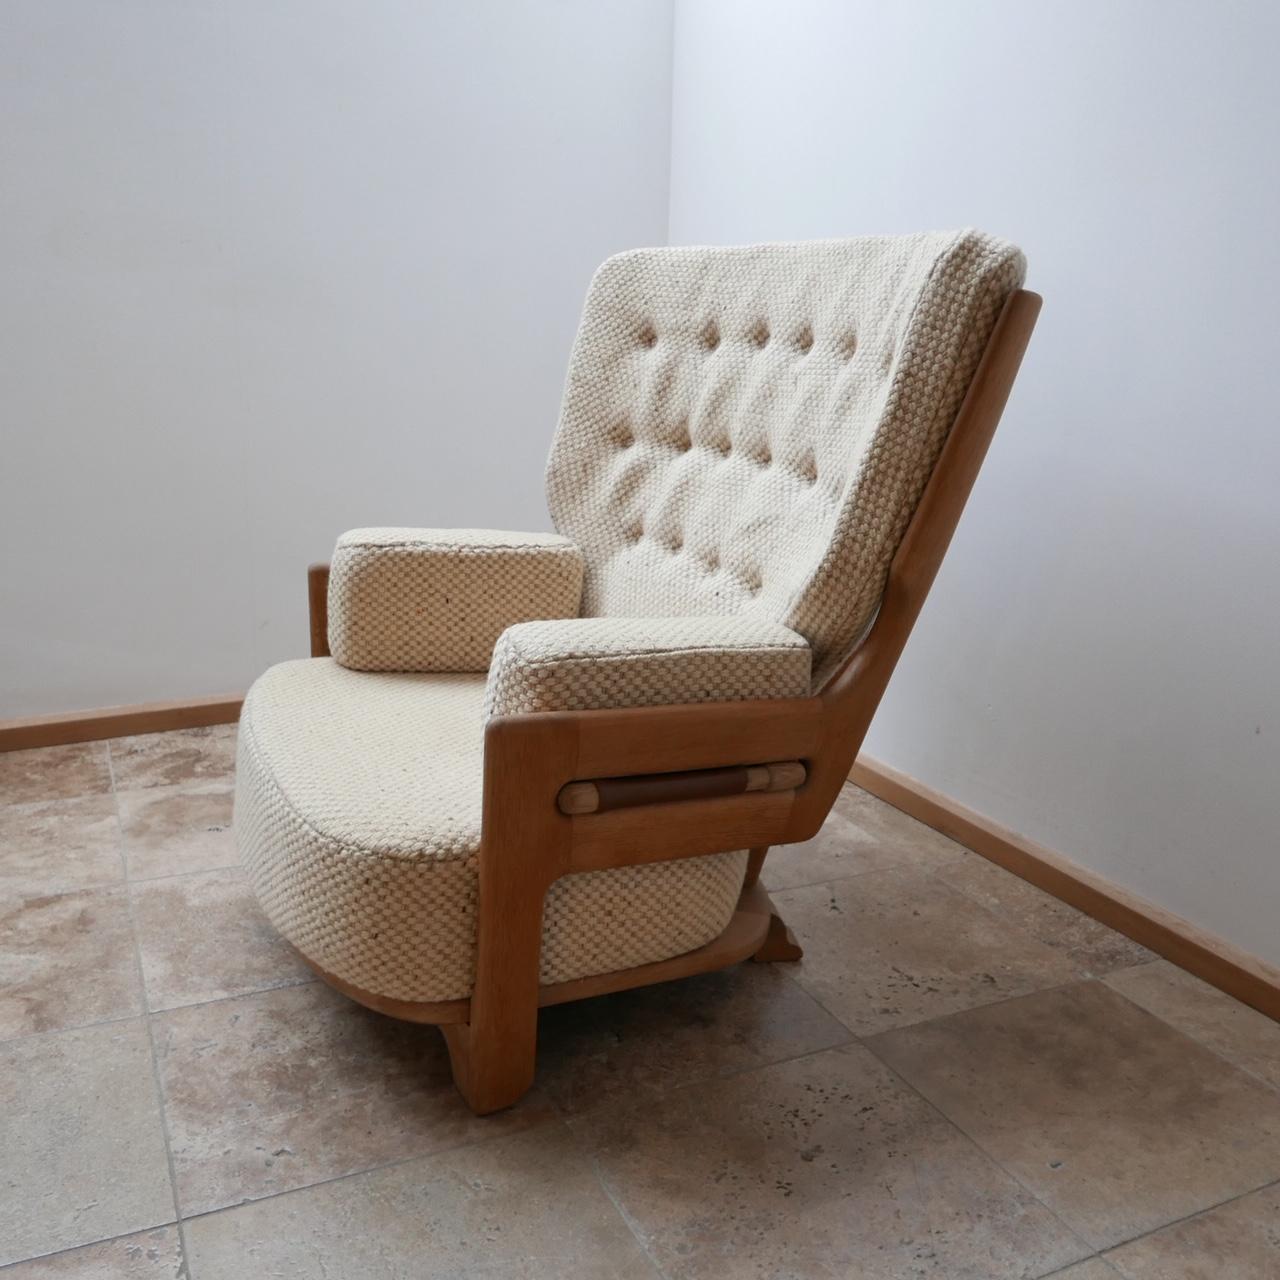 A large comfy armchair by Guillerme et Chambron. 

French, circa 1960s. 

Solid oak, leather straps and upholstery. 

Original upholstery, which can be updated. 

Rare Denis model.

Dimensions: 102 width x 85 depth x 35 seat height x 98